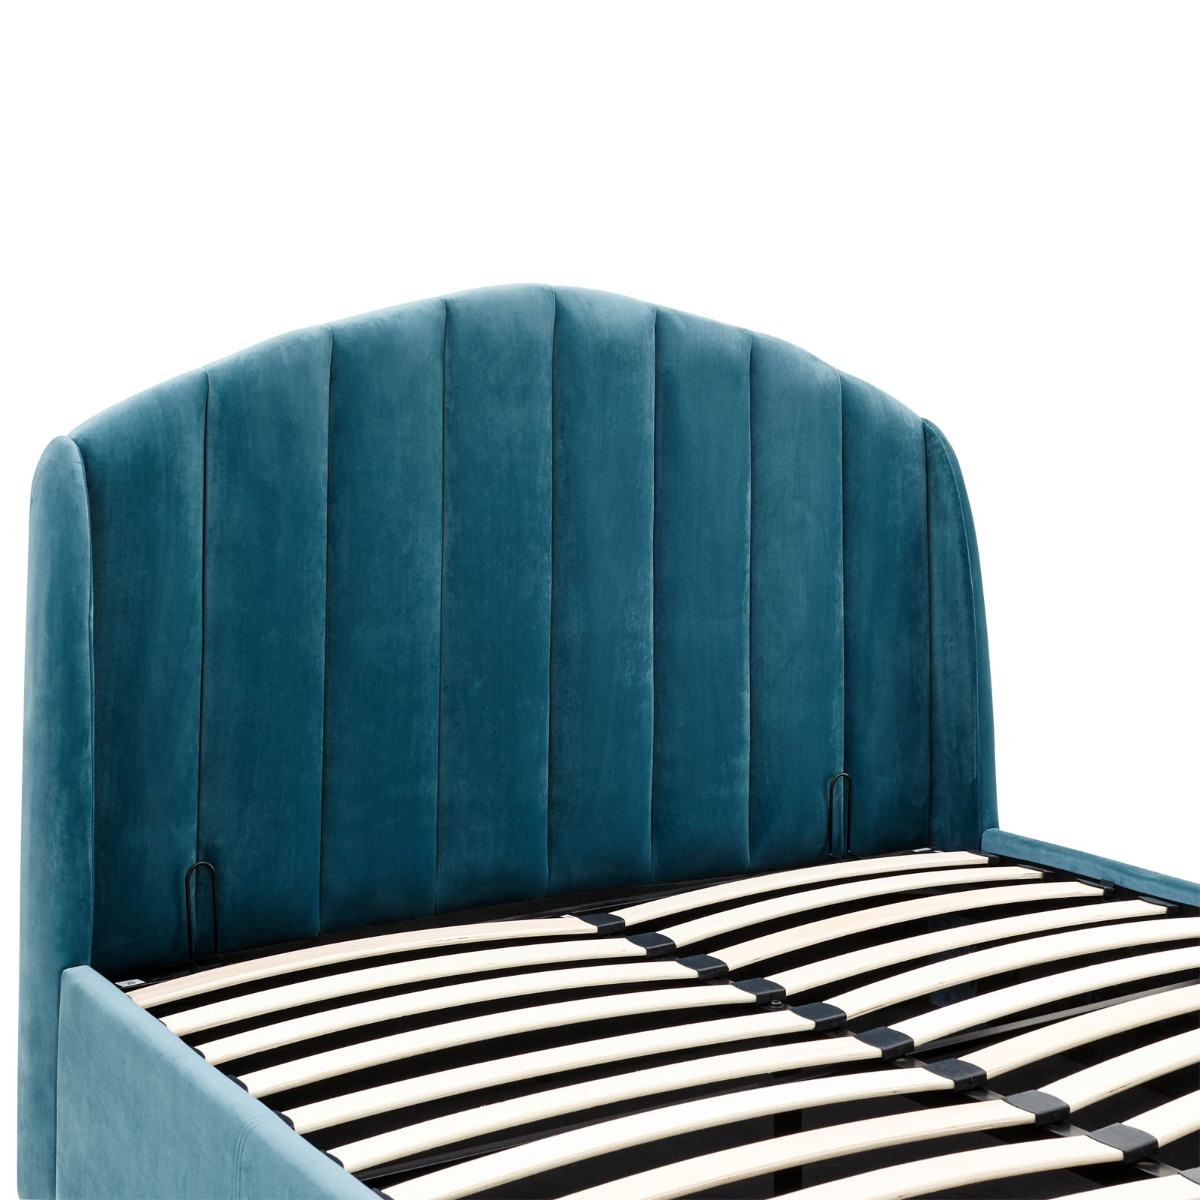 Pettine End Lift Ottoman Storage Bed - Teal>